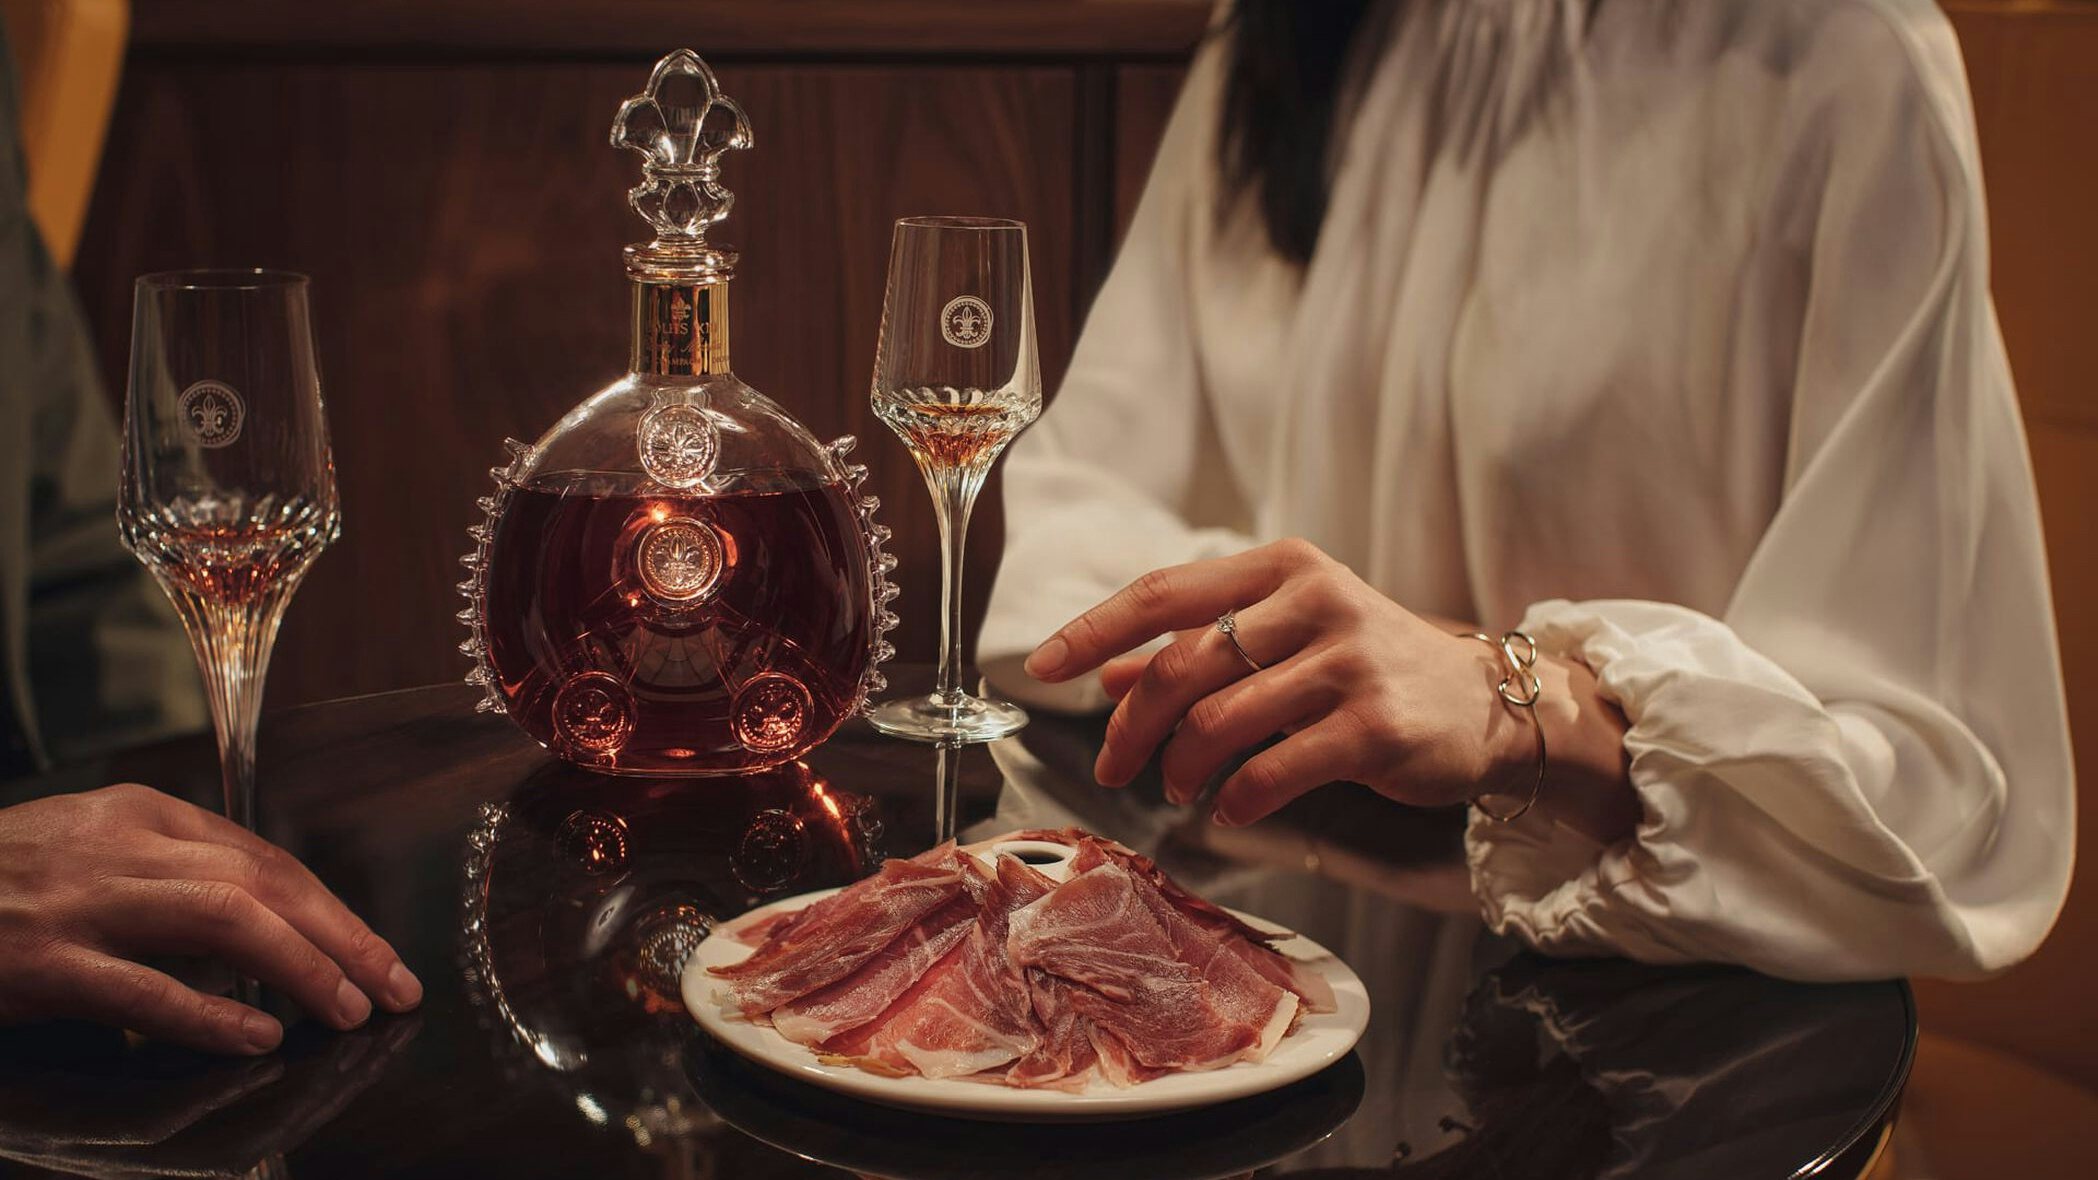 While China’s economic growth has slowed down, it could soon be just looking at another luxury boom, thanks to this growing group of customers. Photo: Louis XIII